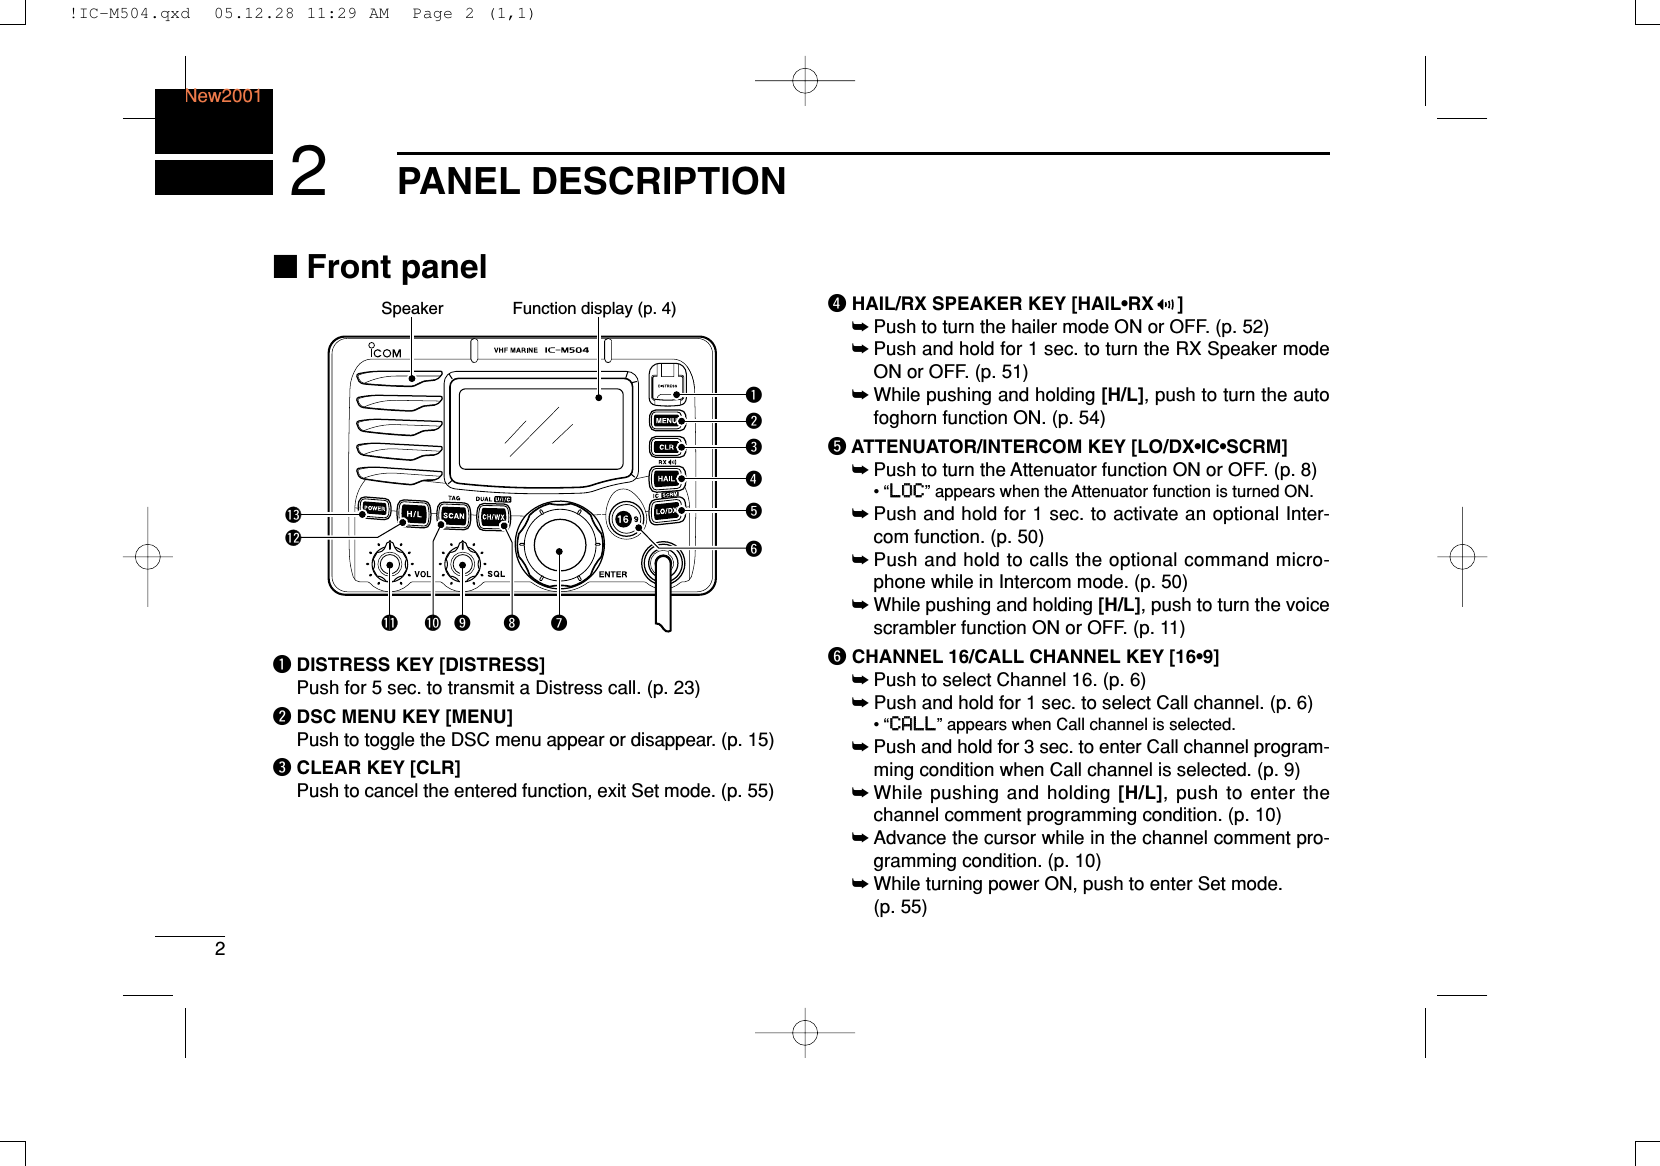 2PANEL DESCRIPTIONNew20012■Front panelqDISTRESS KEY [DISTRESS]Push for 5 sec. to transmit a Distress call. (p. 23)wDSC MENU KEY [MENU]Push to toggle the DSC menu appear or disappear. (p. 15)eCLEAR KEY [CLR]Push to cancel the entered function, exit Set mode. (p. 55)rHAIL/RX SPEAKER KEY [HAIL•RX ]➥Push to turn the hailer mode ON or OFF. (p. 52)➥Push and hold for 1 sec. to turn the RX Speaker modeON or OFF. (p. 51)➥While pushing and holding [H/L], push to turn the autofoghorn function ON. (p. 54)tATTENUATOR/INTERCOM KEY [LO/DX•IC•SCRM]➥Push to turn the Attenuator function ON or OFF. (p. 8)•“LLOOCC” appears when the Attenuator function is turned ON.➥Push and hold for 1 sec. to activate an optional Inter-com function. (p. 50)➥Push and hold to calls the optional command micro-phone while in Intercom mode. (p. 50)➥While pushing and holding [H/L], push to turn the voicescrambler function ON or OFF. (p. 11)yCHANNEL 16/CALL CHANNEL KEY [16•9]➥Push to select Channel 16. (p. 6)➥Push and hold for 1 sec. to select Call channel. (p. 6)•“CCAALLLL” appears when Call channel is selected.➥Push and hold for 3 sec. to enter Call channel program-ming condition when Call channel is selected. (p. 9)➥While pushing and holding [H/L], push to enter thechannel comment programming condition. (p. 10)➥Advance the cursor while in the channel comment pro-gramming condition. (p. 10)➥While turning power ON, push to enter Set mode. (p. 55)Function display (p. 4)Speakerqertywuio!0!1!2!3!IC-M504.qxd  05.12.28 11:29 AM  Page 2 (1,1)